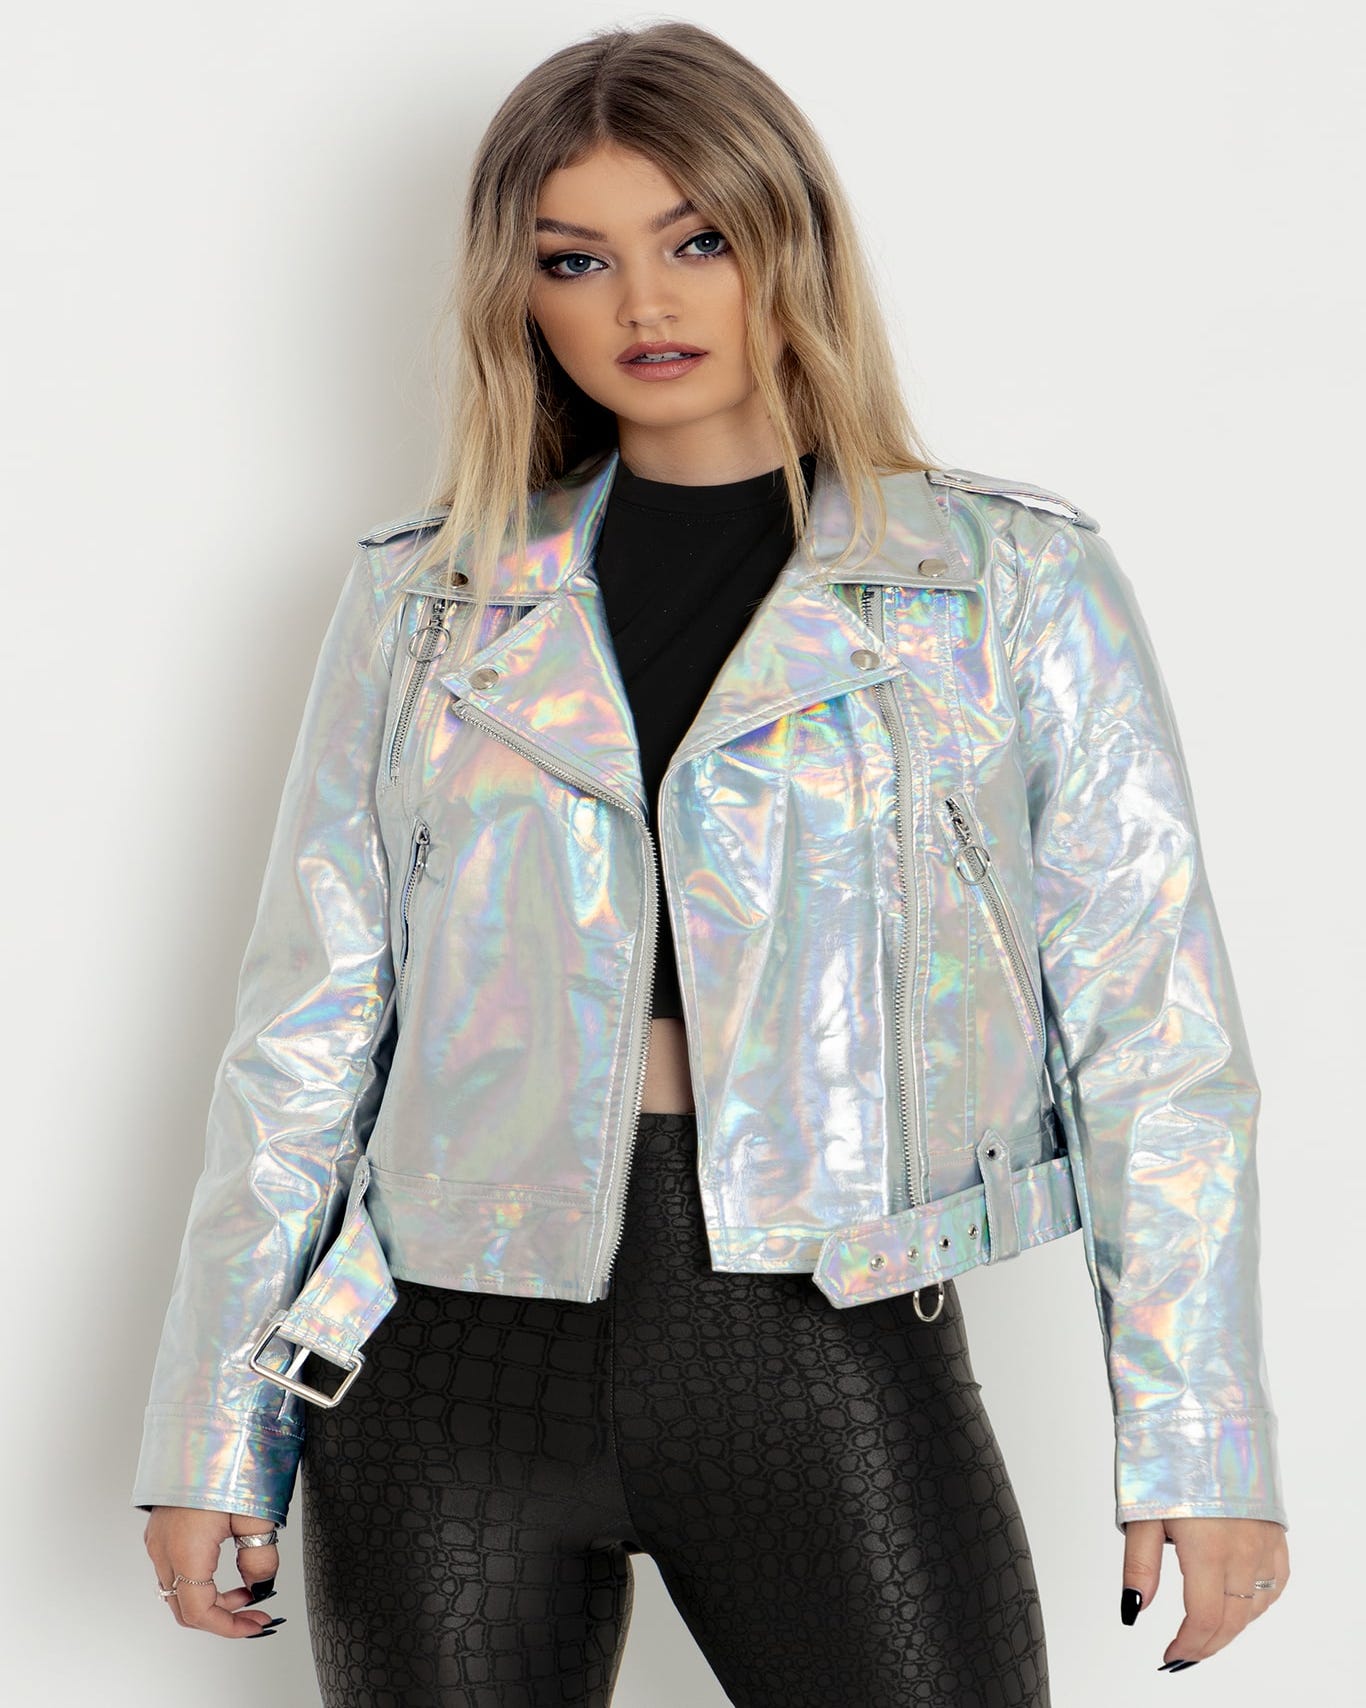 Force Field Holographic Moto Jacket (SECONDS) - Limited